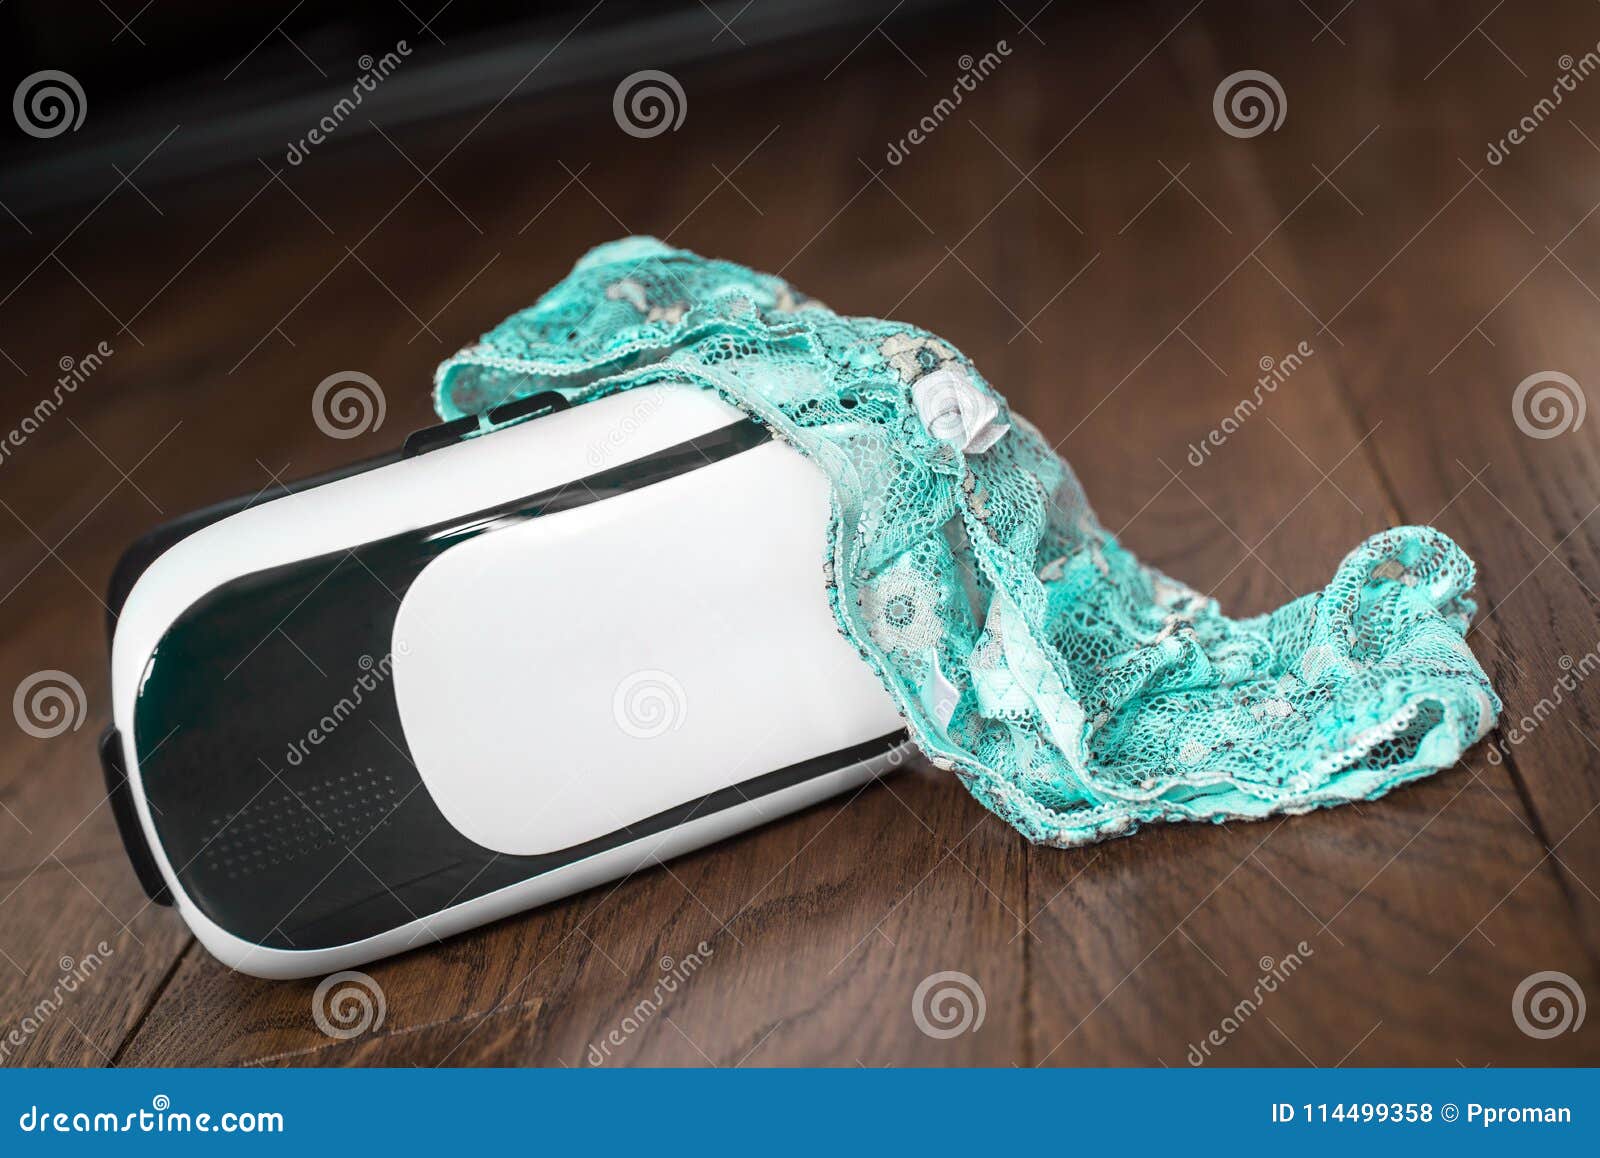 https://thumbs.dreamstime.com/z/virtual-reality-glasses-mobile-devices-women-lingerie-bra-vr-concept-used-porn-video-adult-entertainment-114499358.jpg